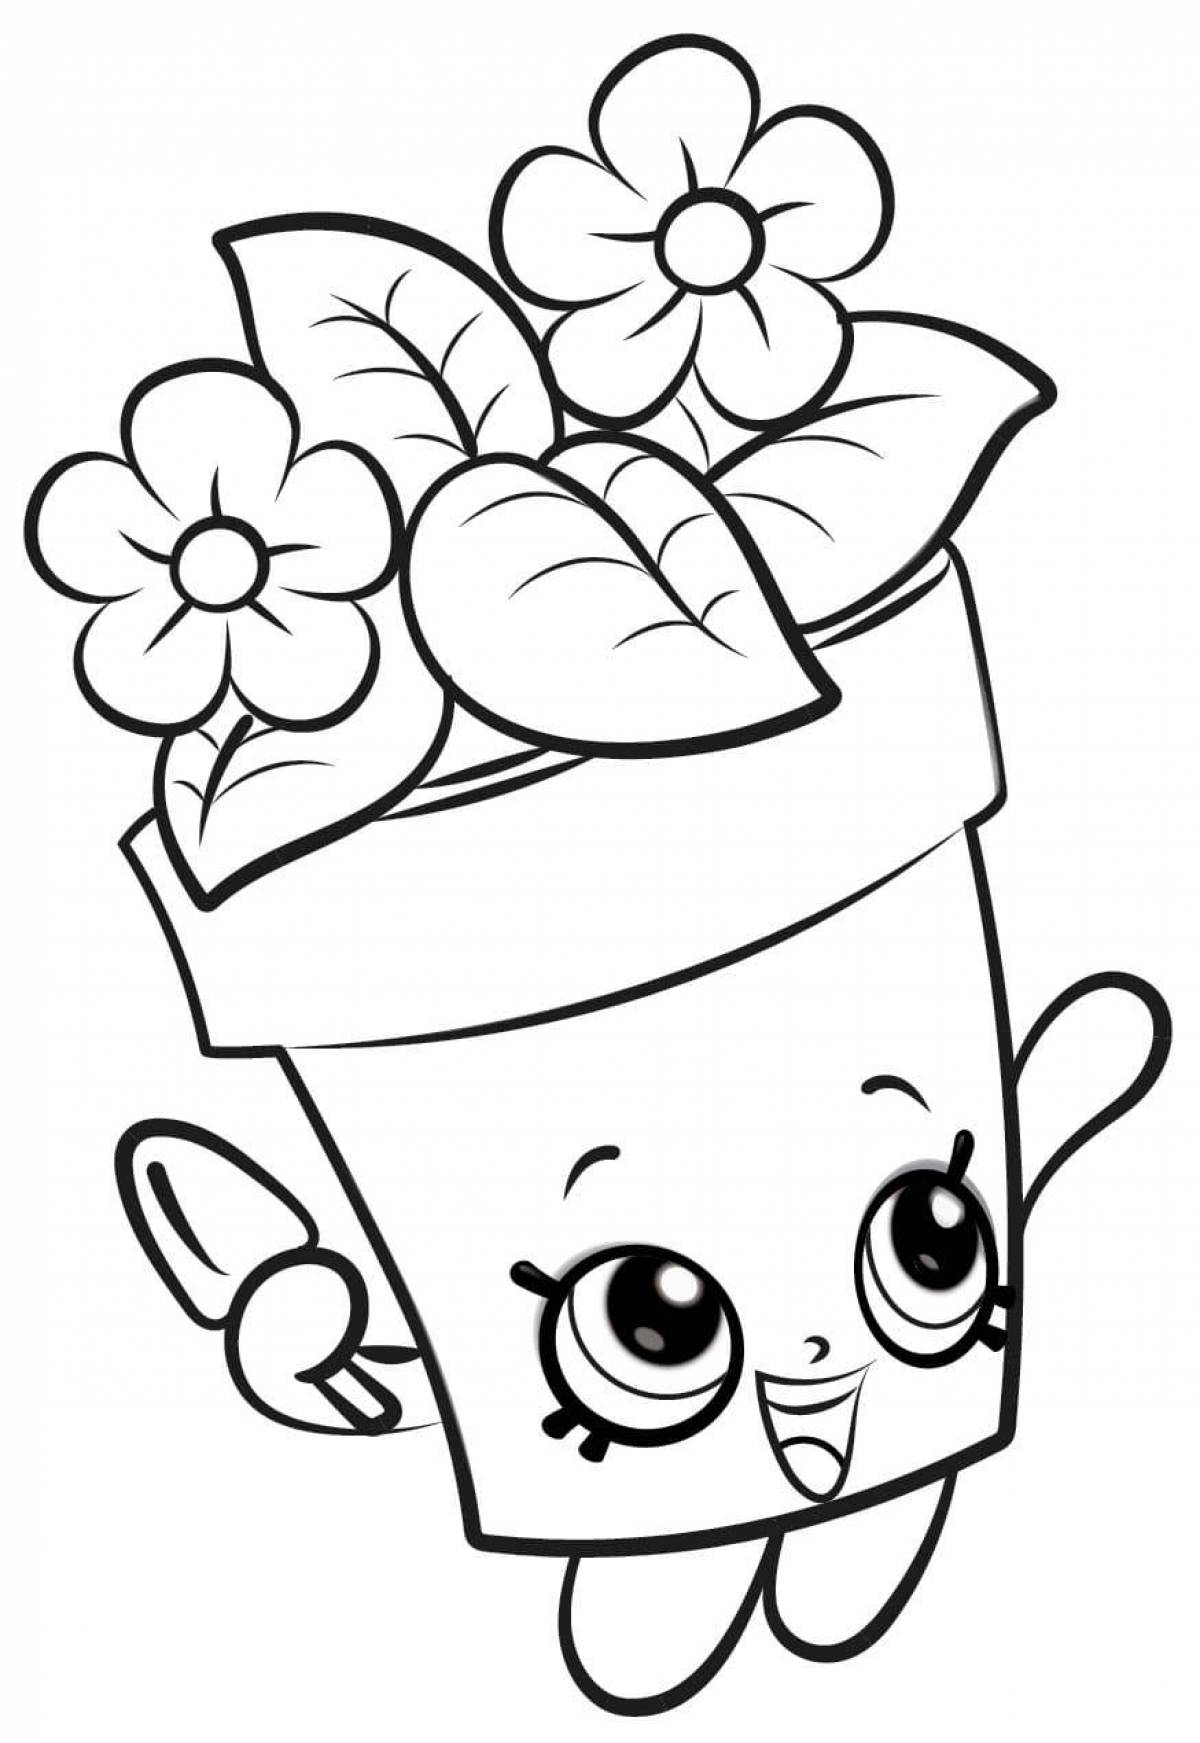 Lovely shopkins coloring page